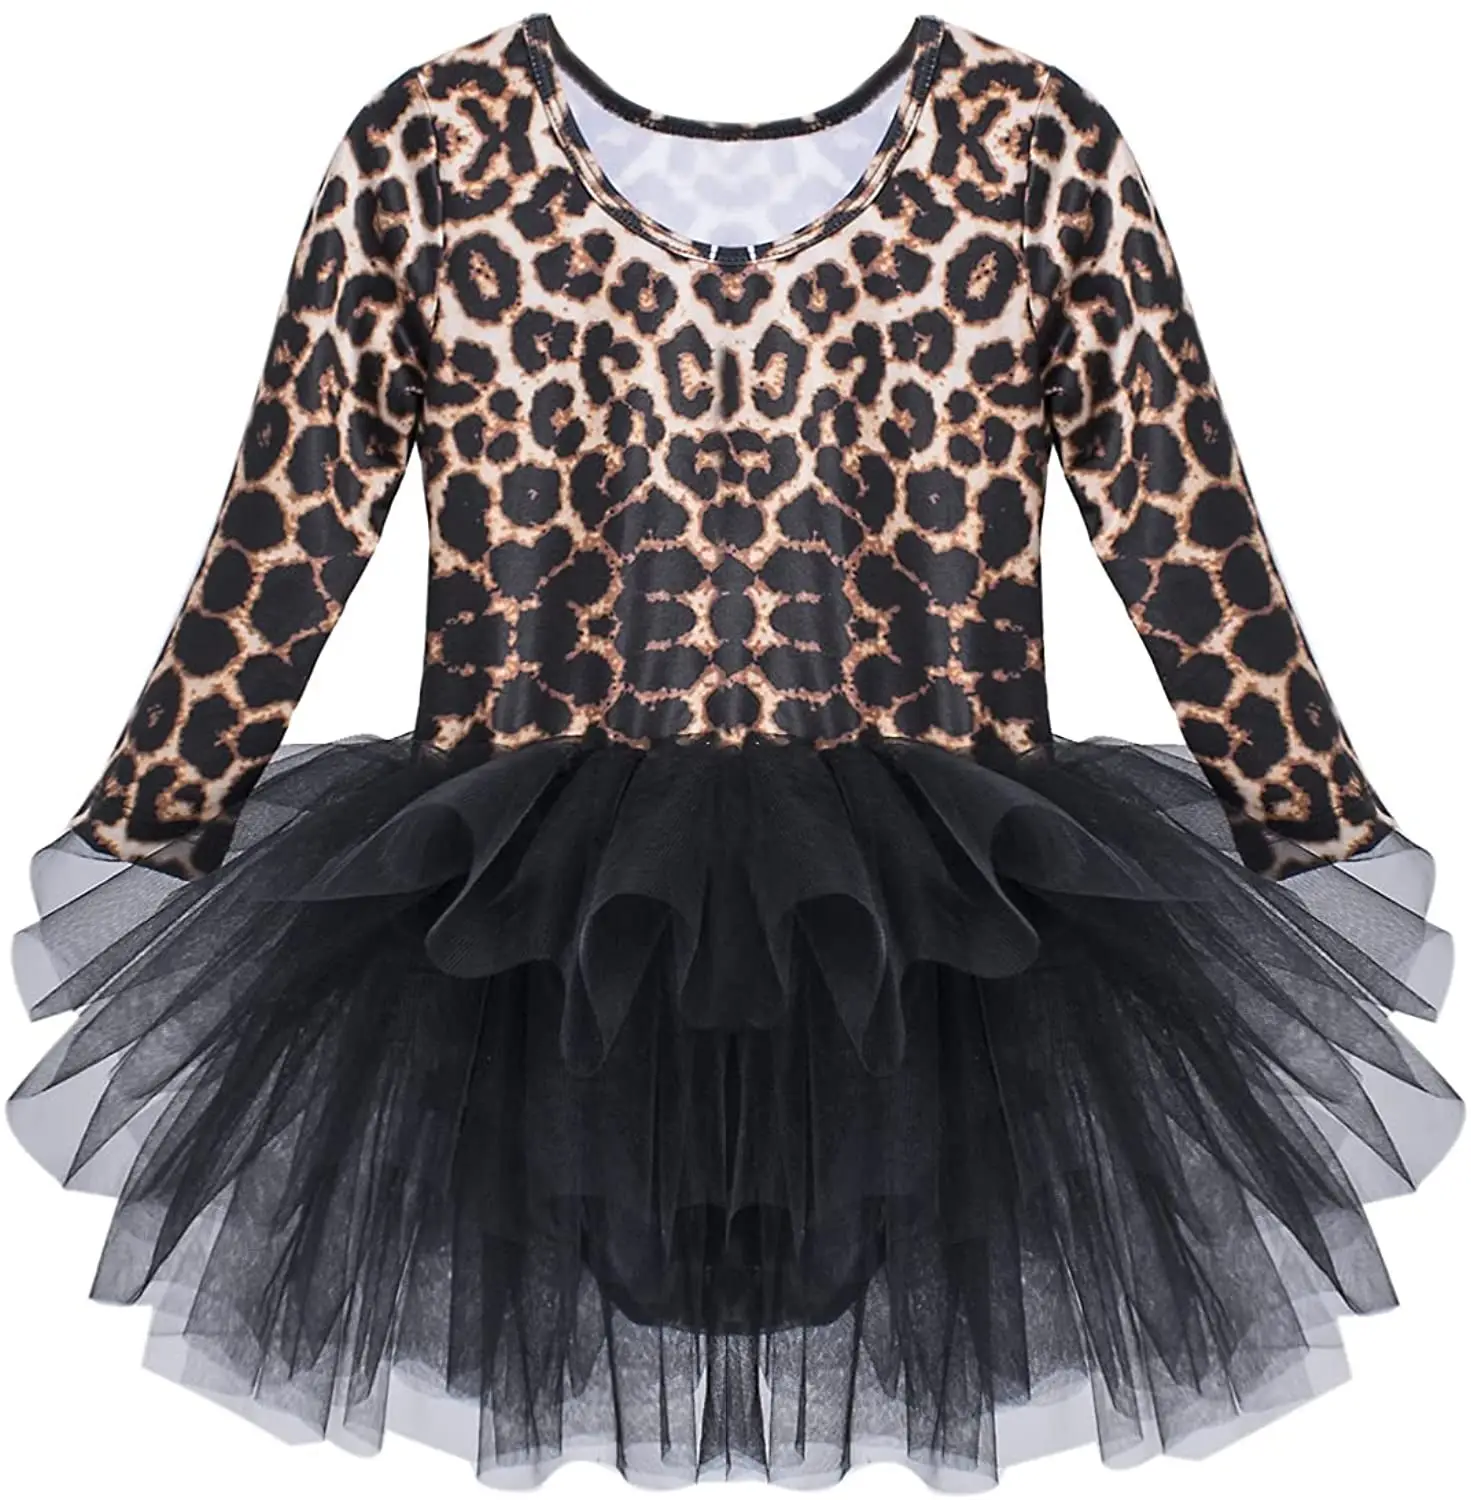 FREE SAMPLE Toddler Girls Ballet Tutu Dress Leopard Print Camisole Dance Leotard for Party and Costume 2-8 Years